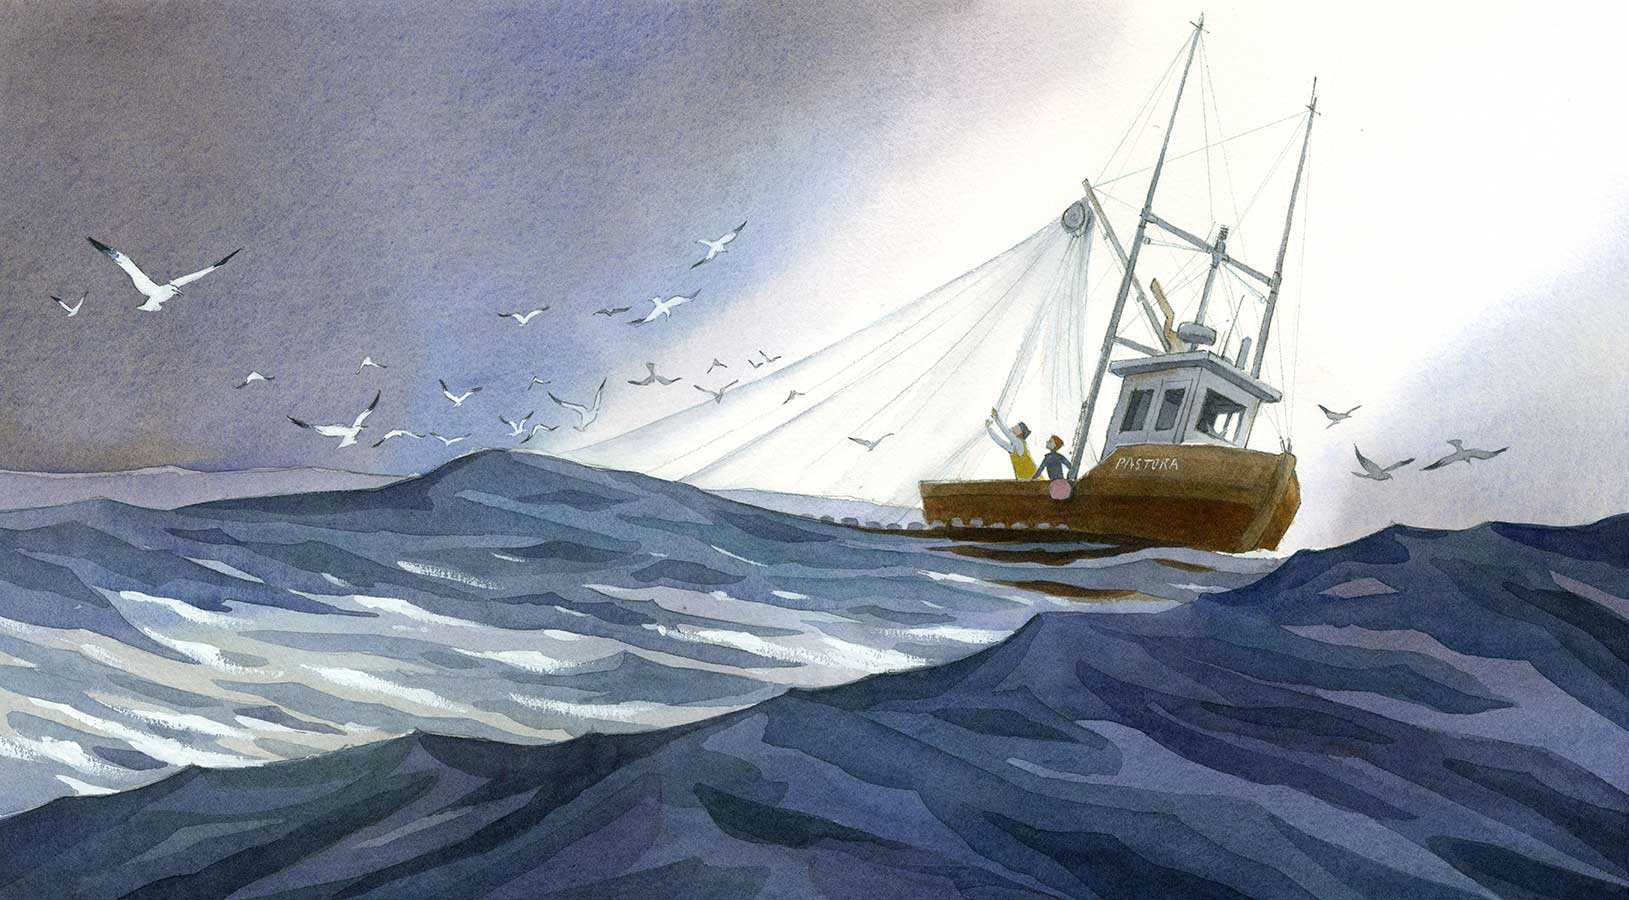 Watercolor llustration from the title page of 'The Fisherman and the Whale' showing a small fishing boat on a rough sea of blue and gray.